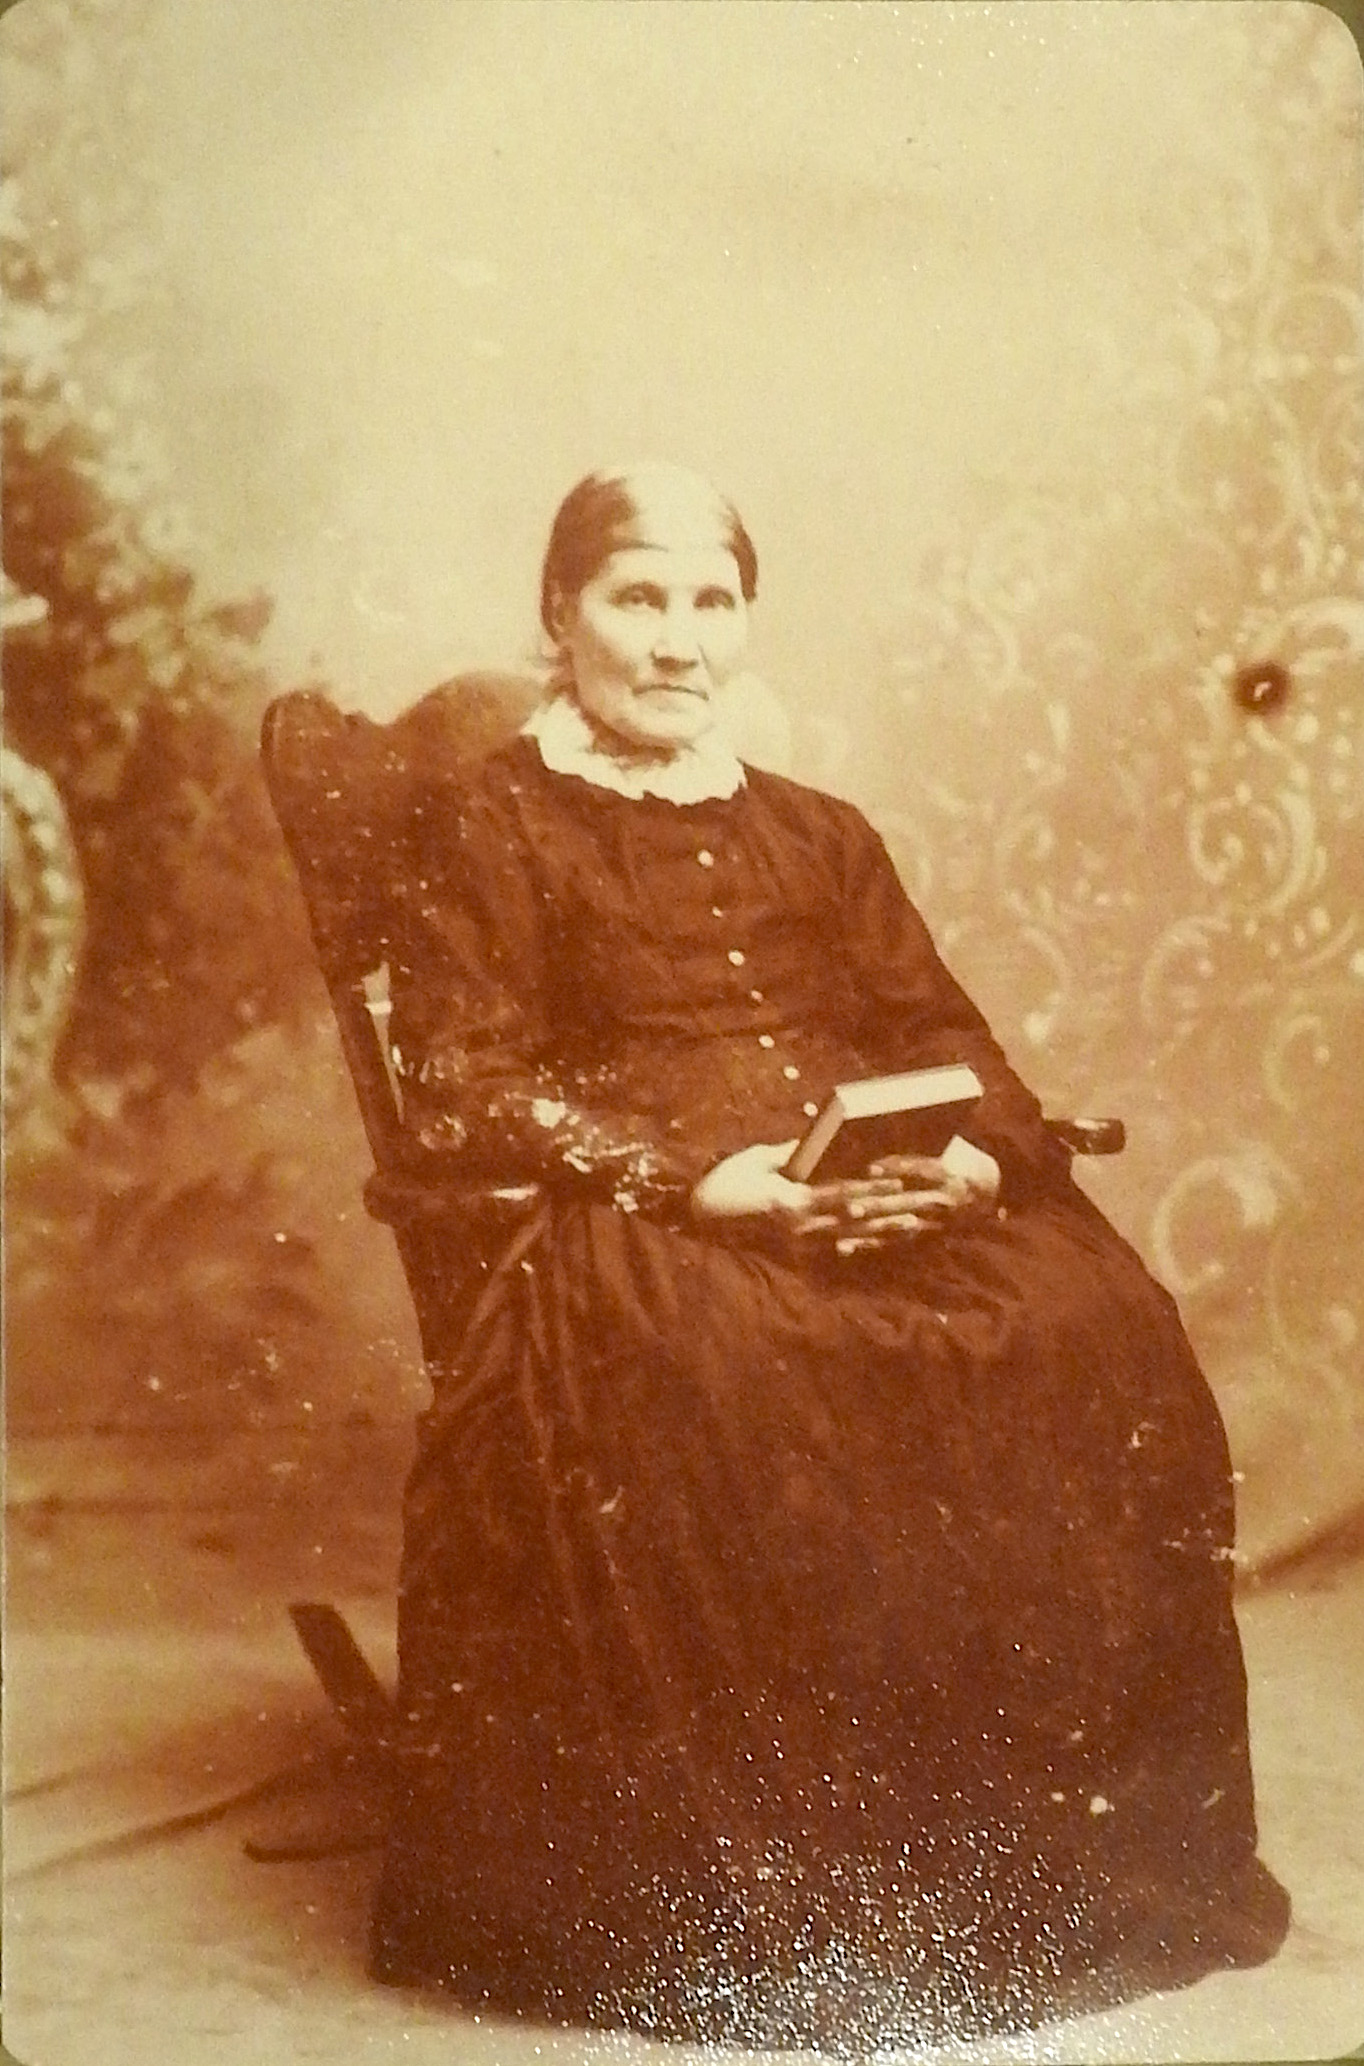 Eva Anderson is sitting in a chair and holding a book, possibly a Bible